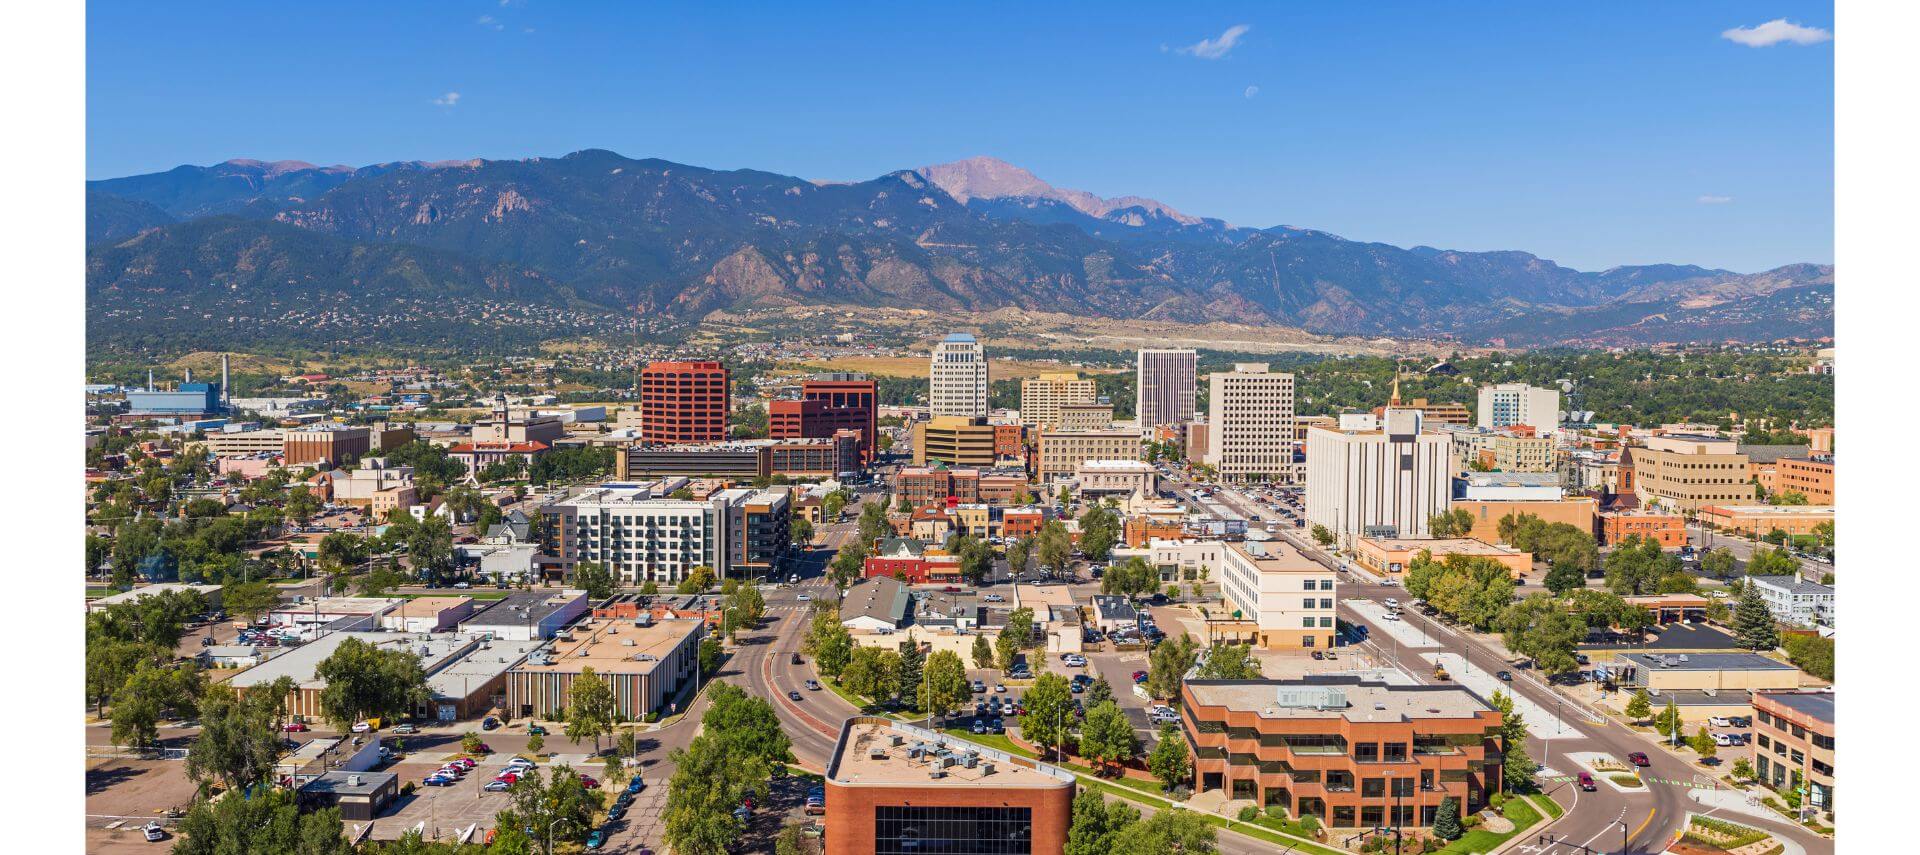 city of Colorado Springs with mountains in the background